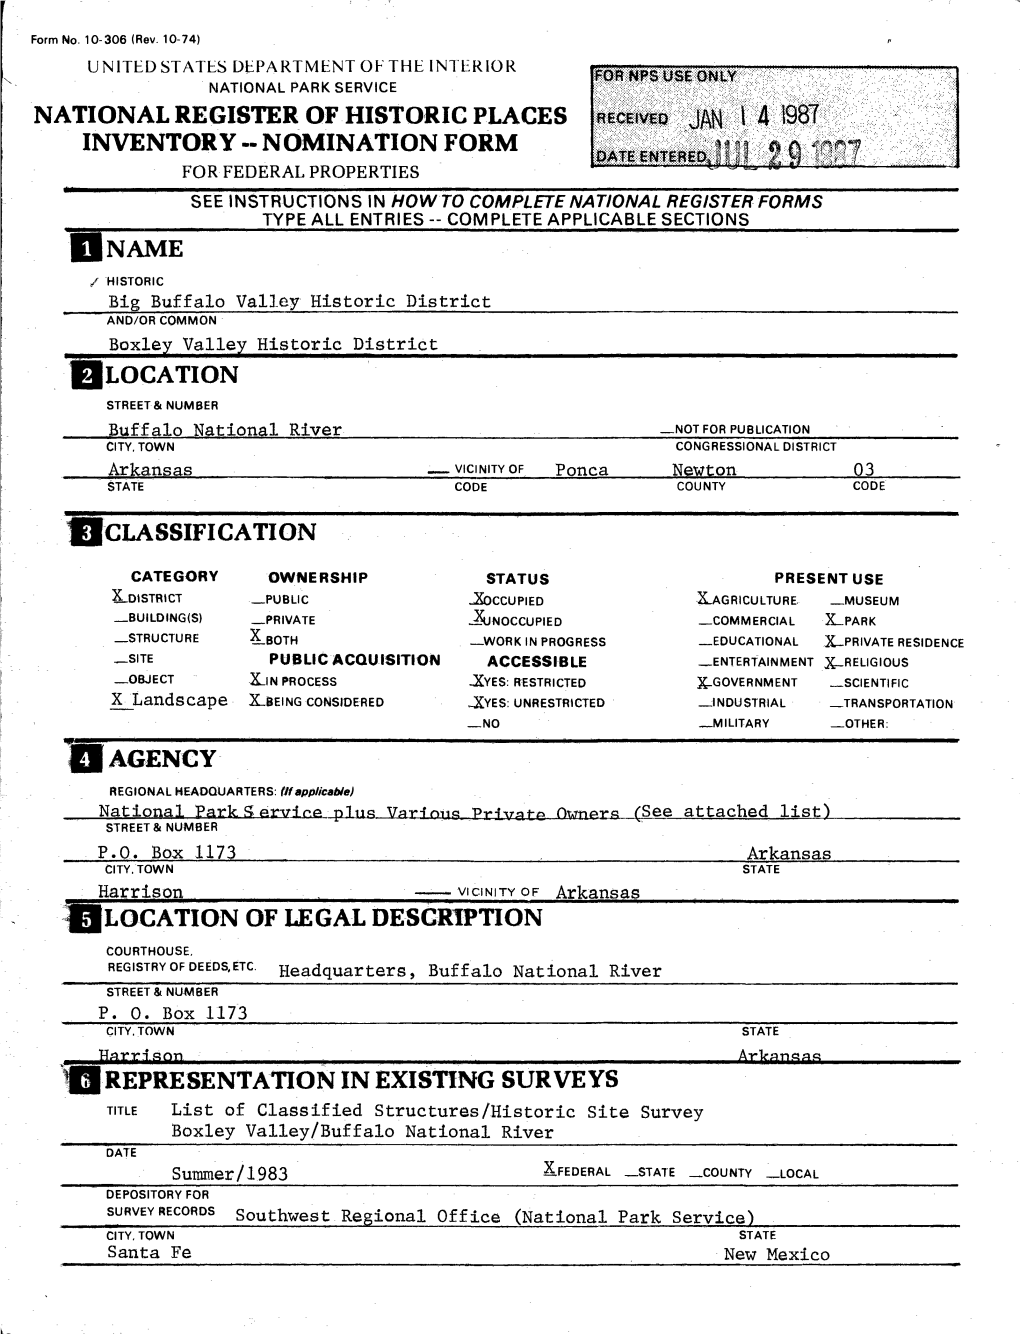 National Register of Historic Places Inventory--Nomination Form